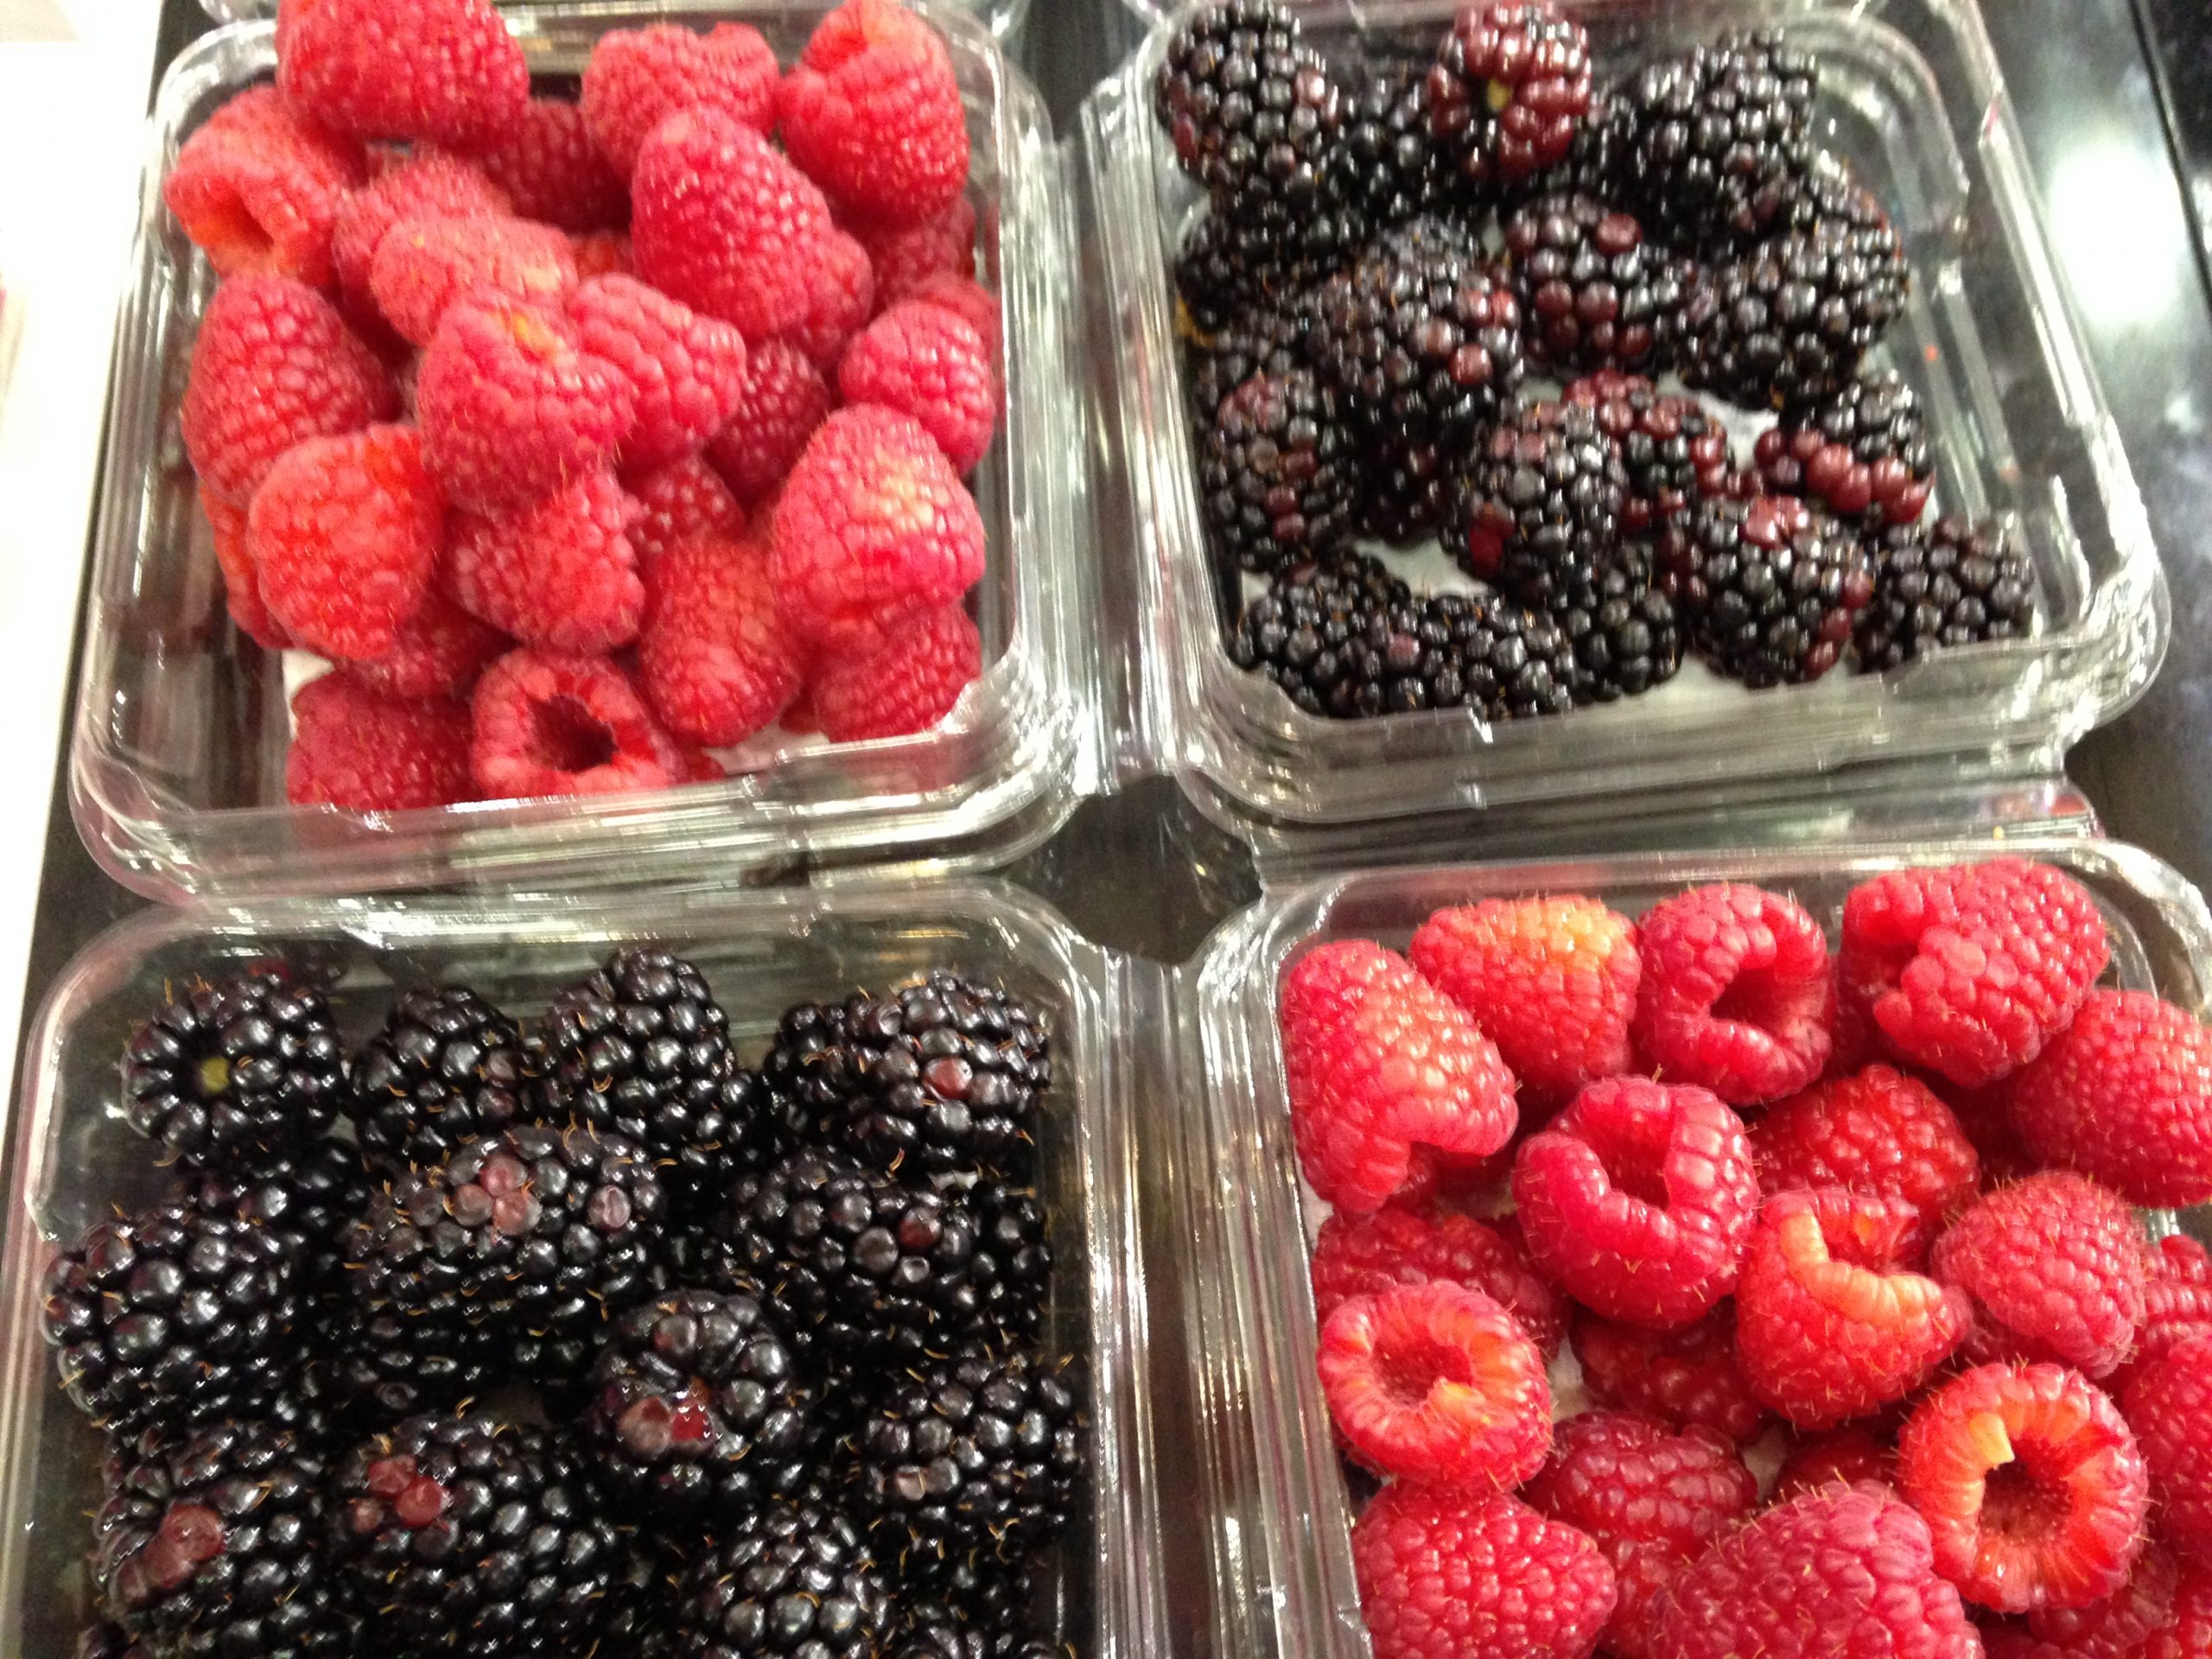 As of May 9, fresh Andean blackberries and raspberries can be imported from Ecuador into the continental United States under what is known as a systems approach.